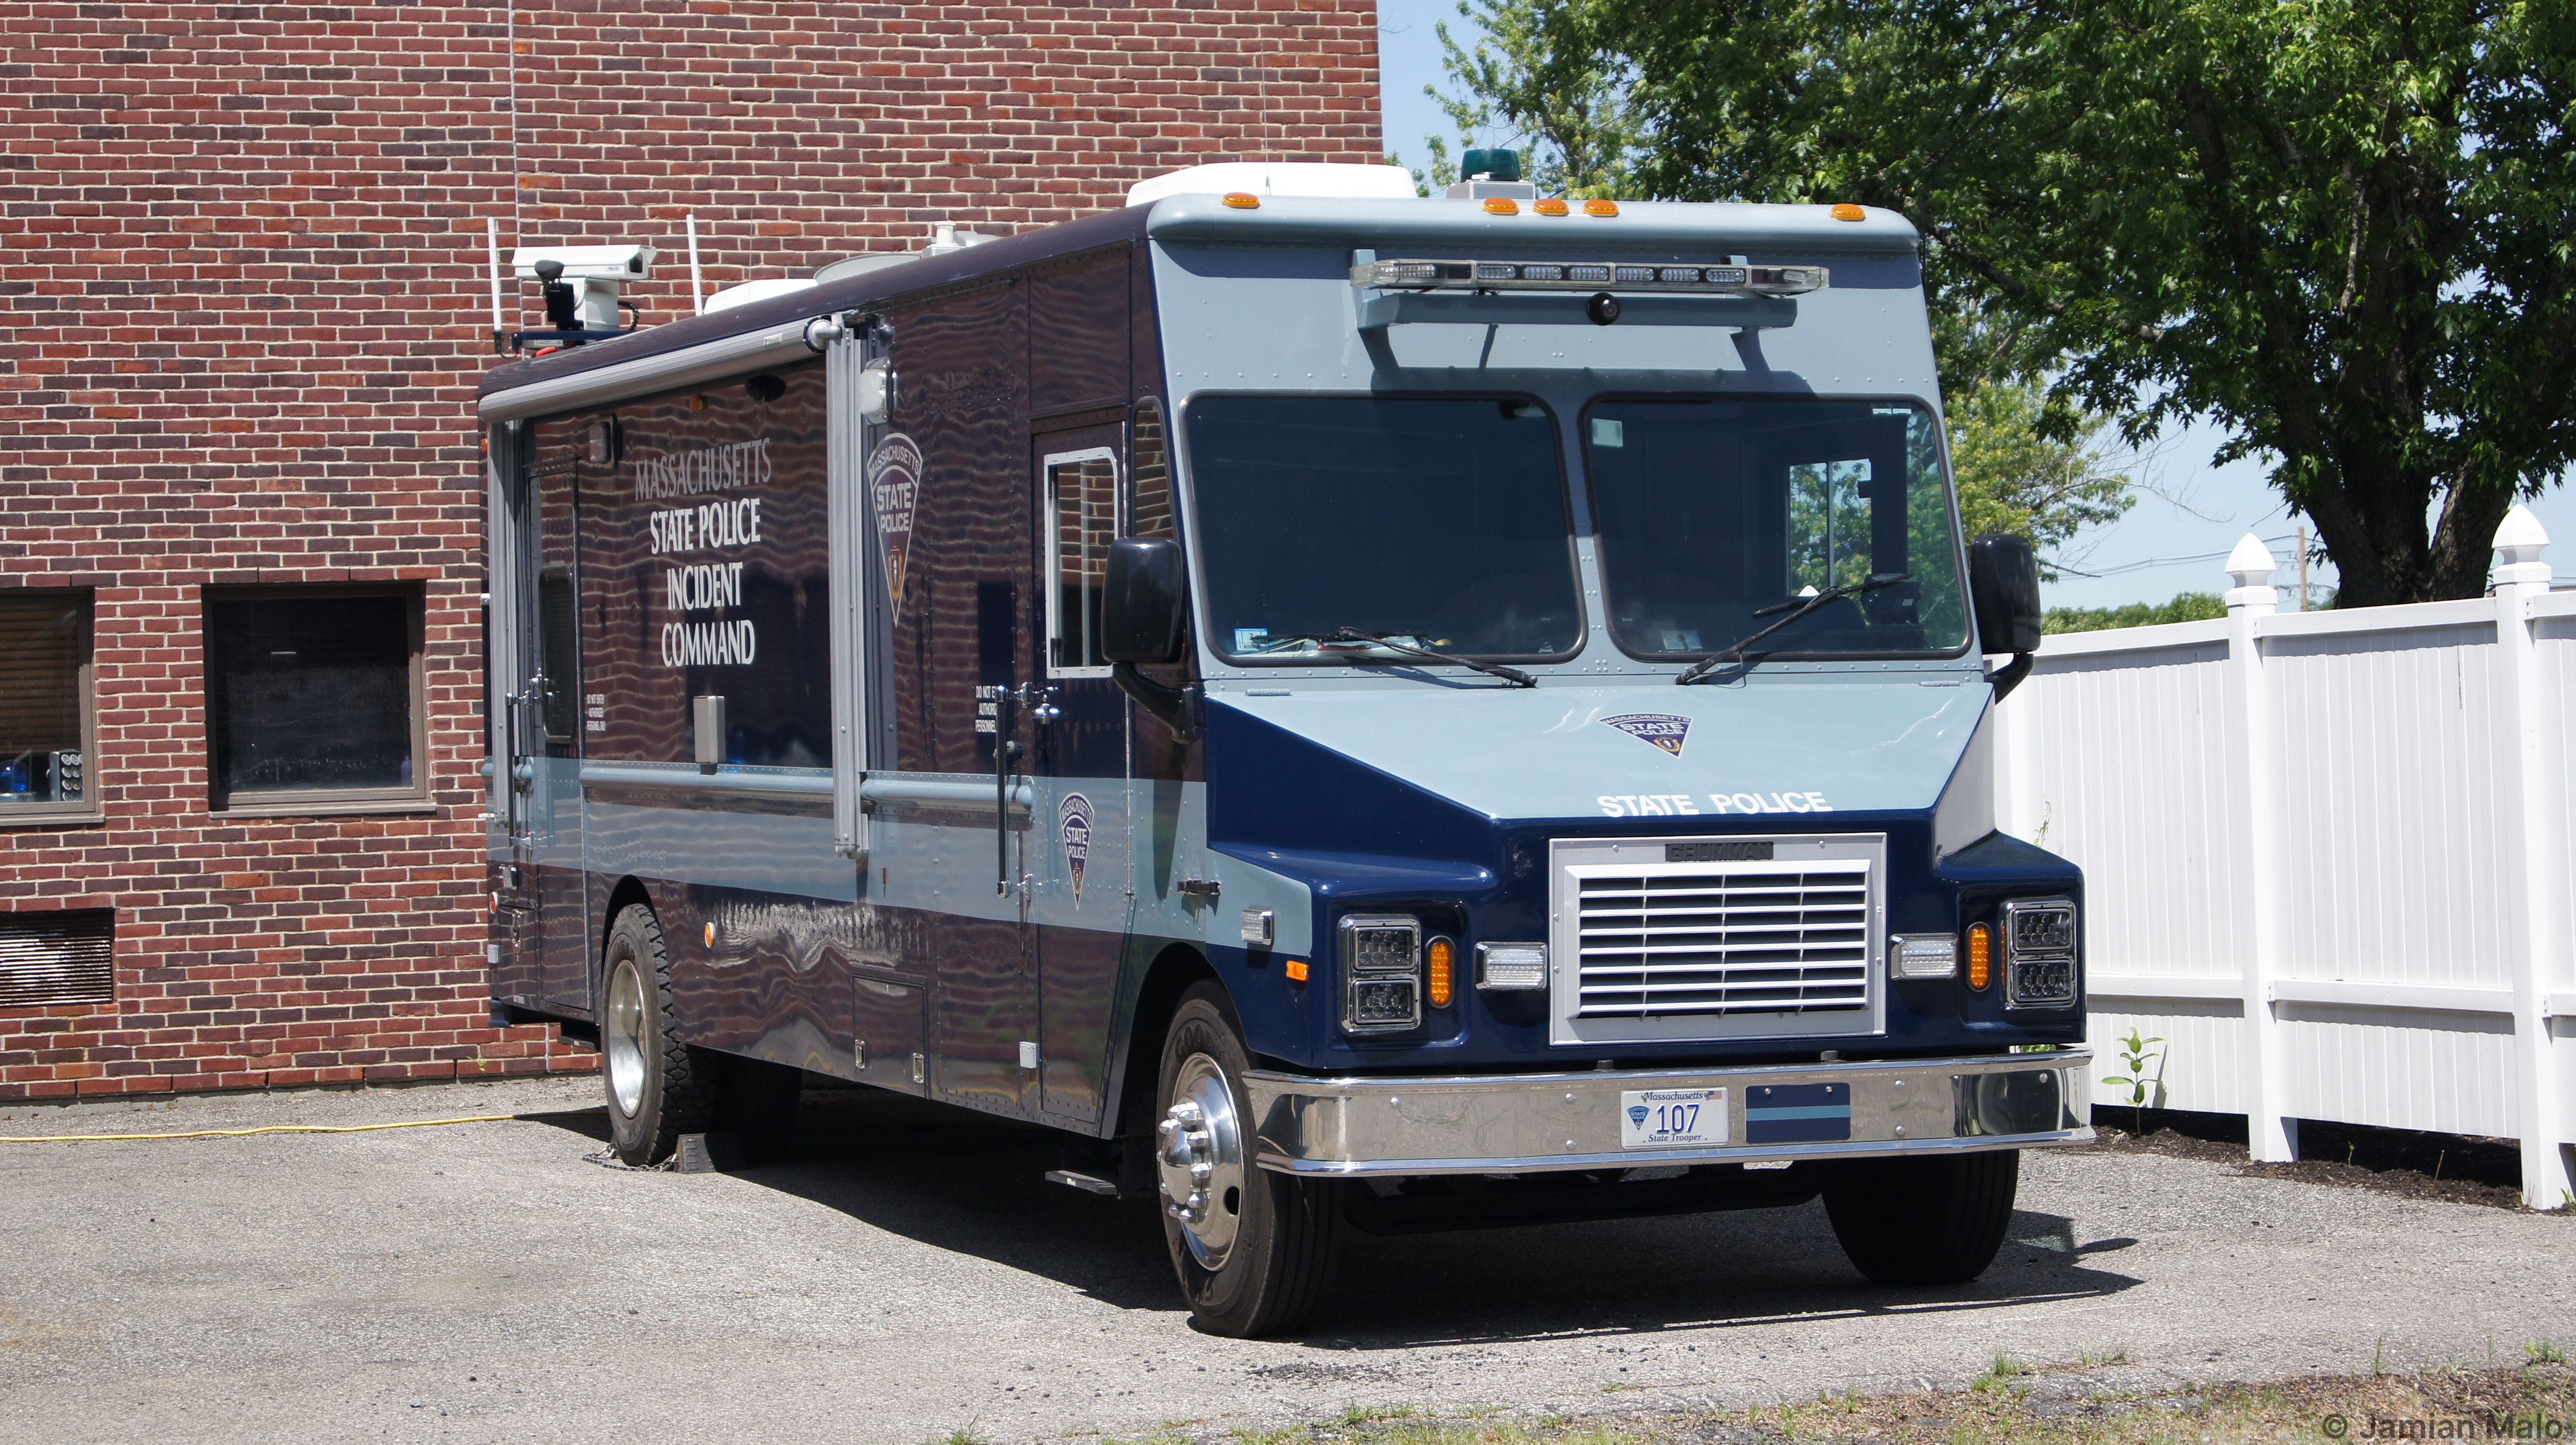 A photo  of Massachusetts State Police
            Incident Command Center 107, a 1990 Grumman             taken by Jamian Malo